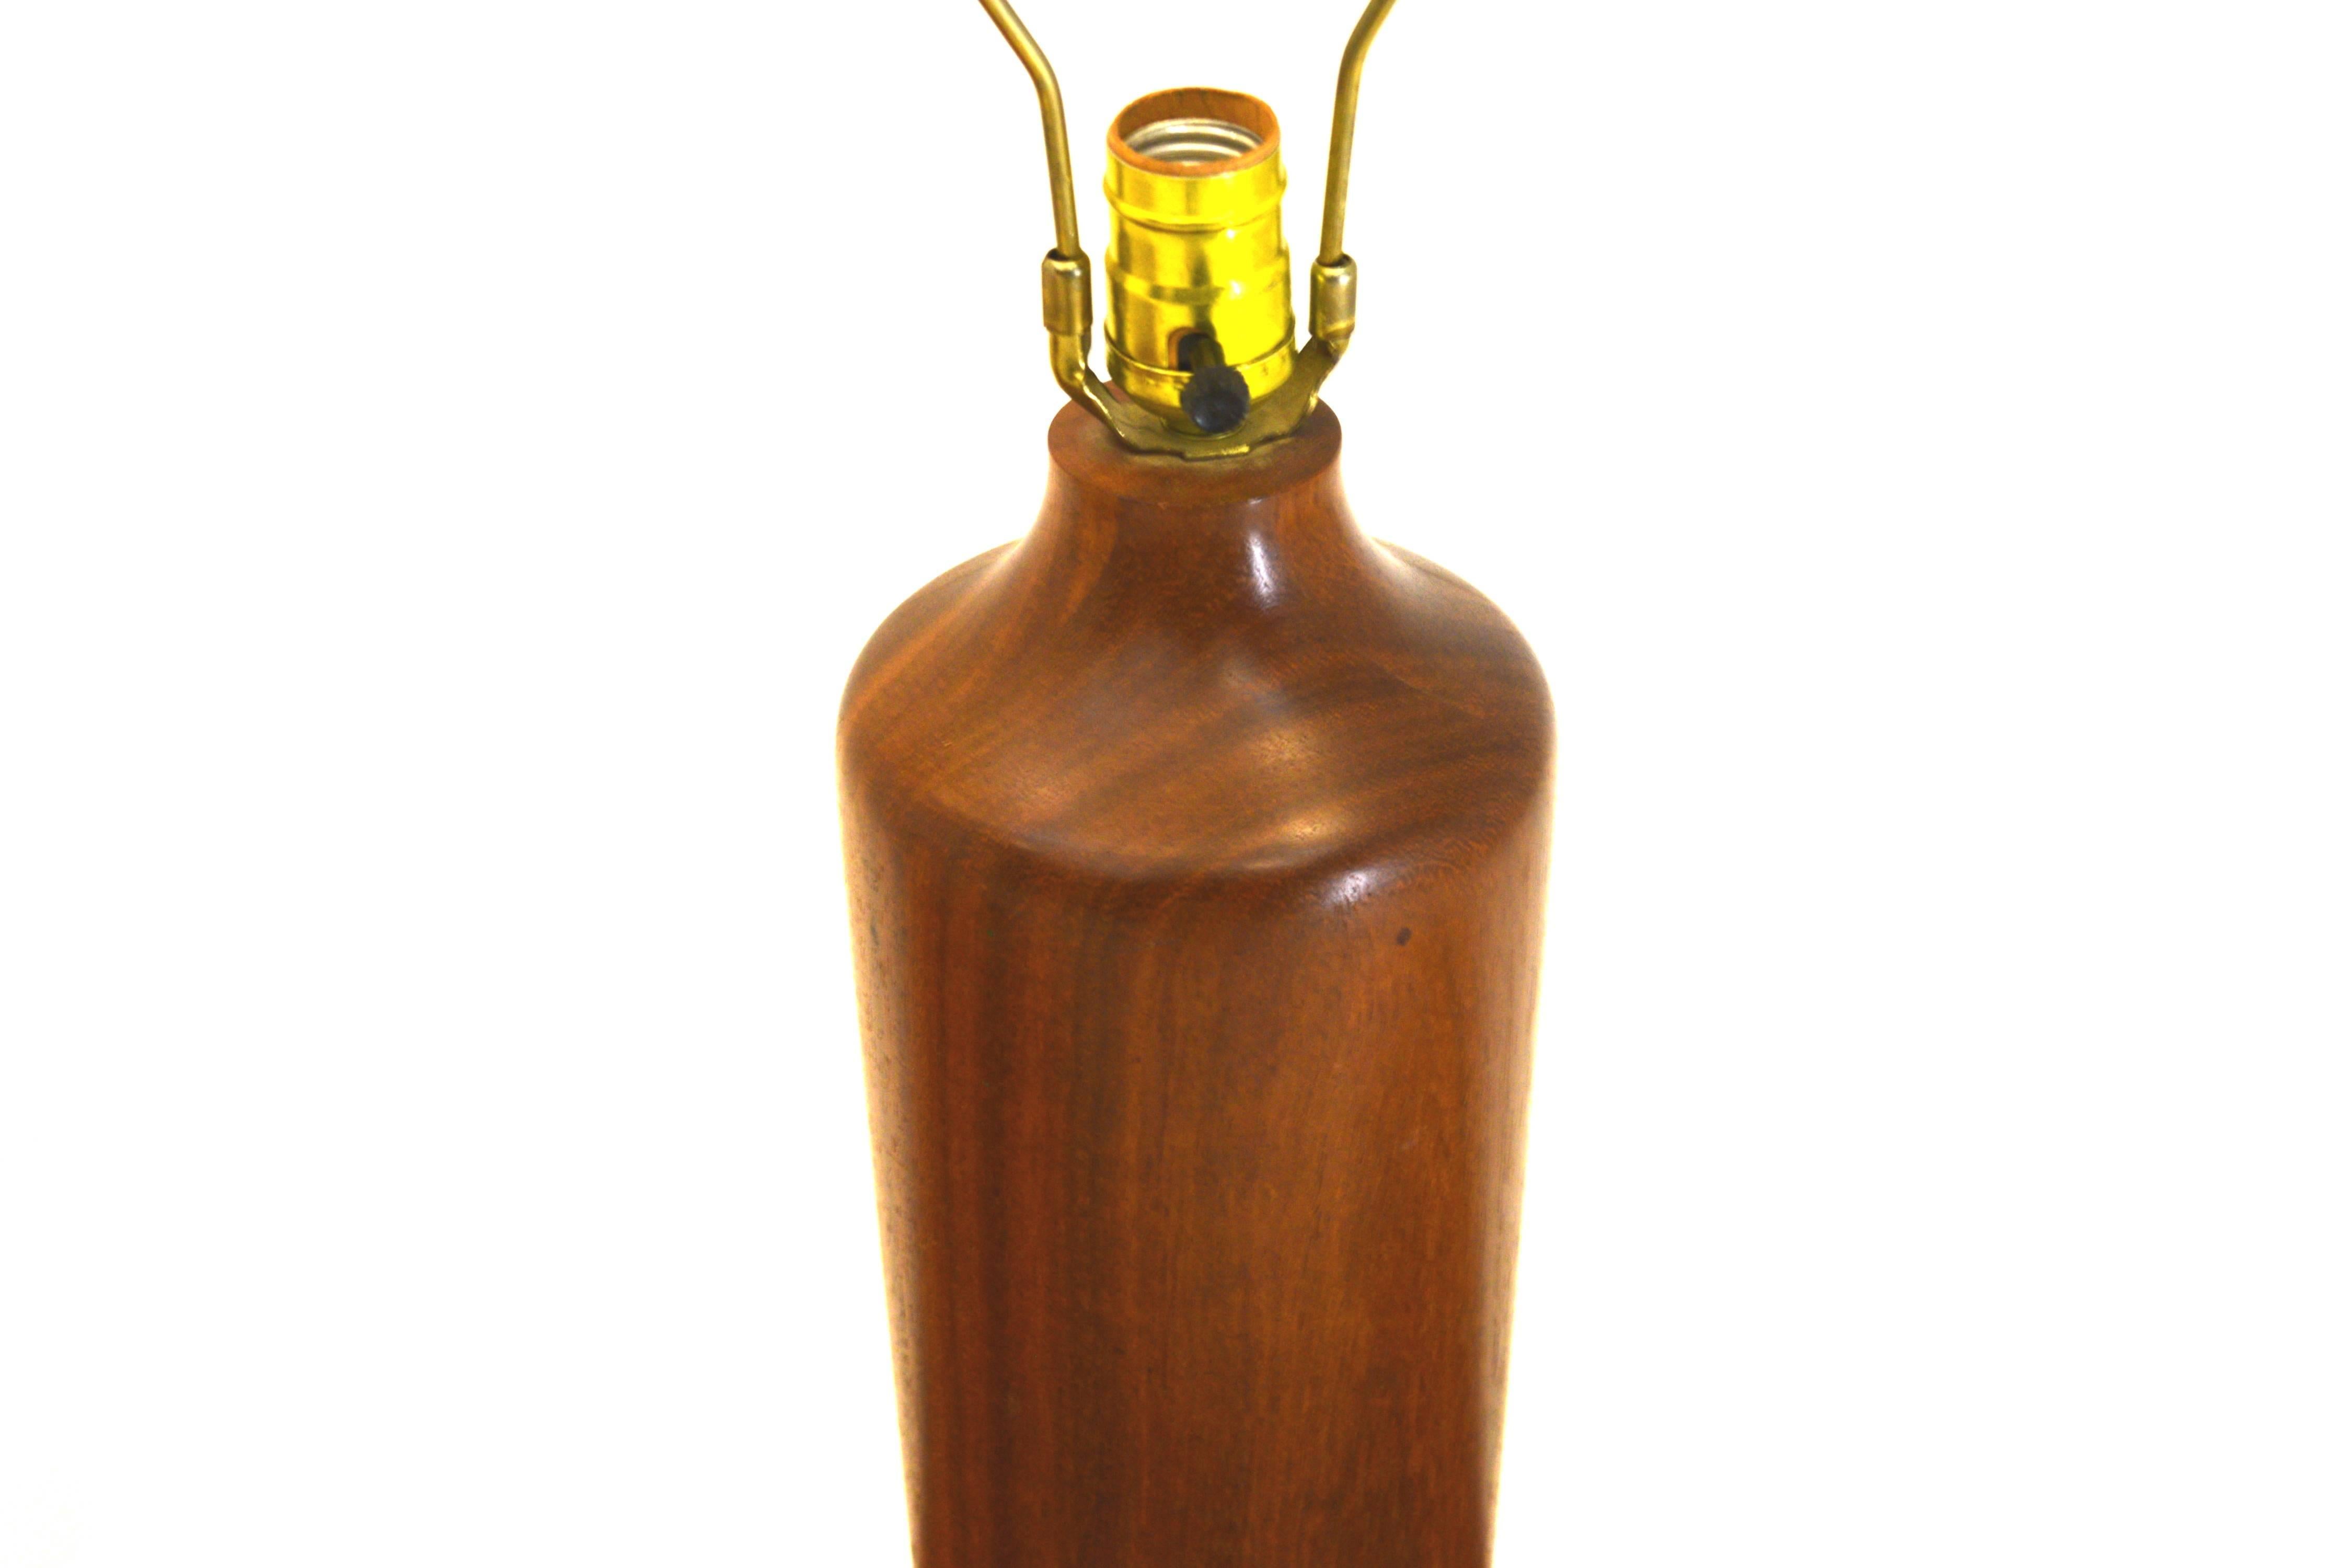 Table lamp,teak, circa 1965
Measures: 5 wide x 23 inches to finial. Body is 15 inches tall.
Very heavy, with perfect proportions. The light switch is located at the 16